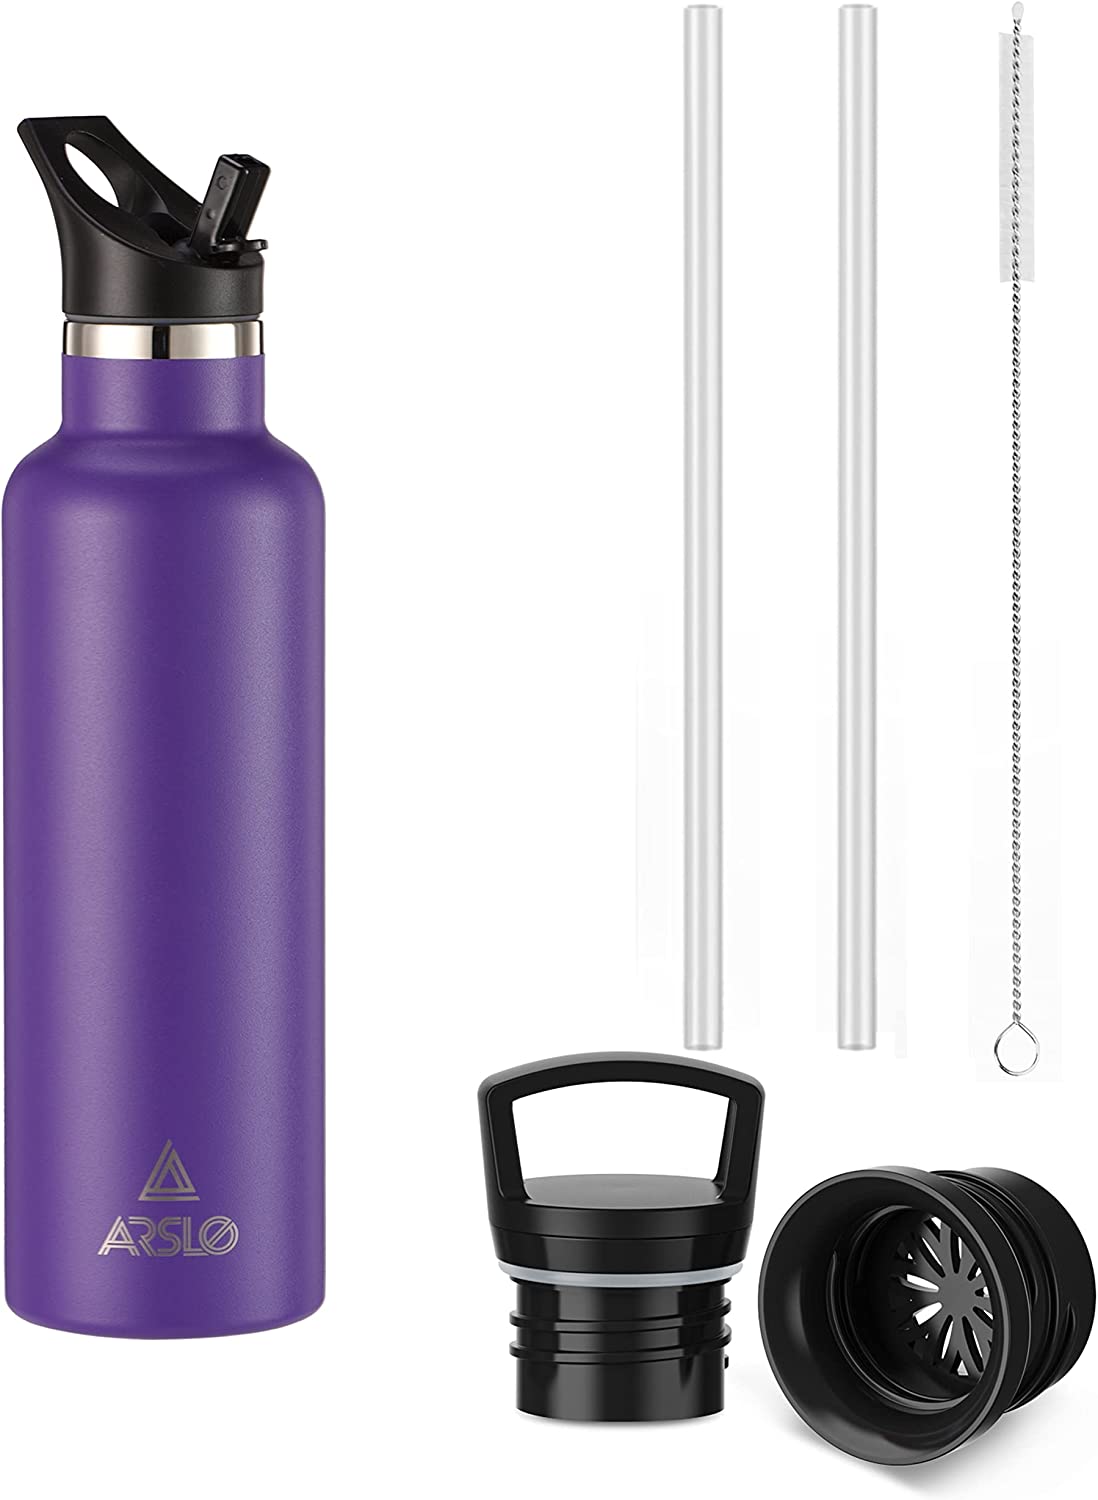 Arslo Stainless Steel Double Wall Water Bottle, Vacuum Insulated Bottle With Straw Lid, Insulated Water Bottle Keeps Water Cold for 24 Hours, Hot for 12 Hours, Hiking, Sports